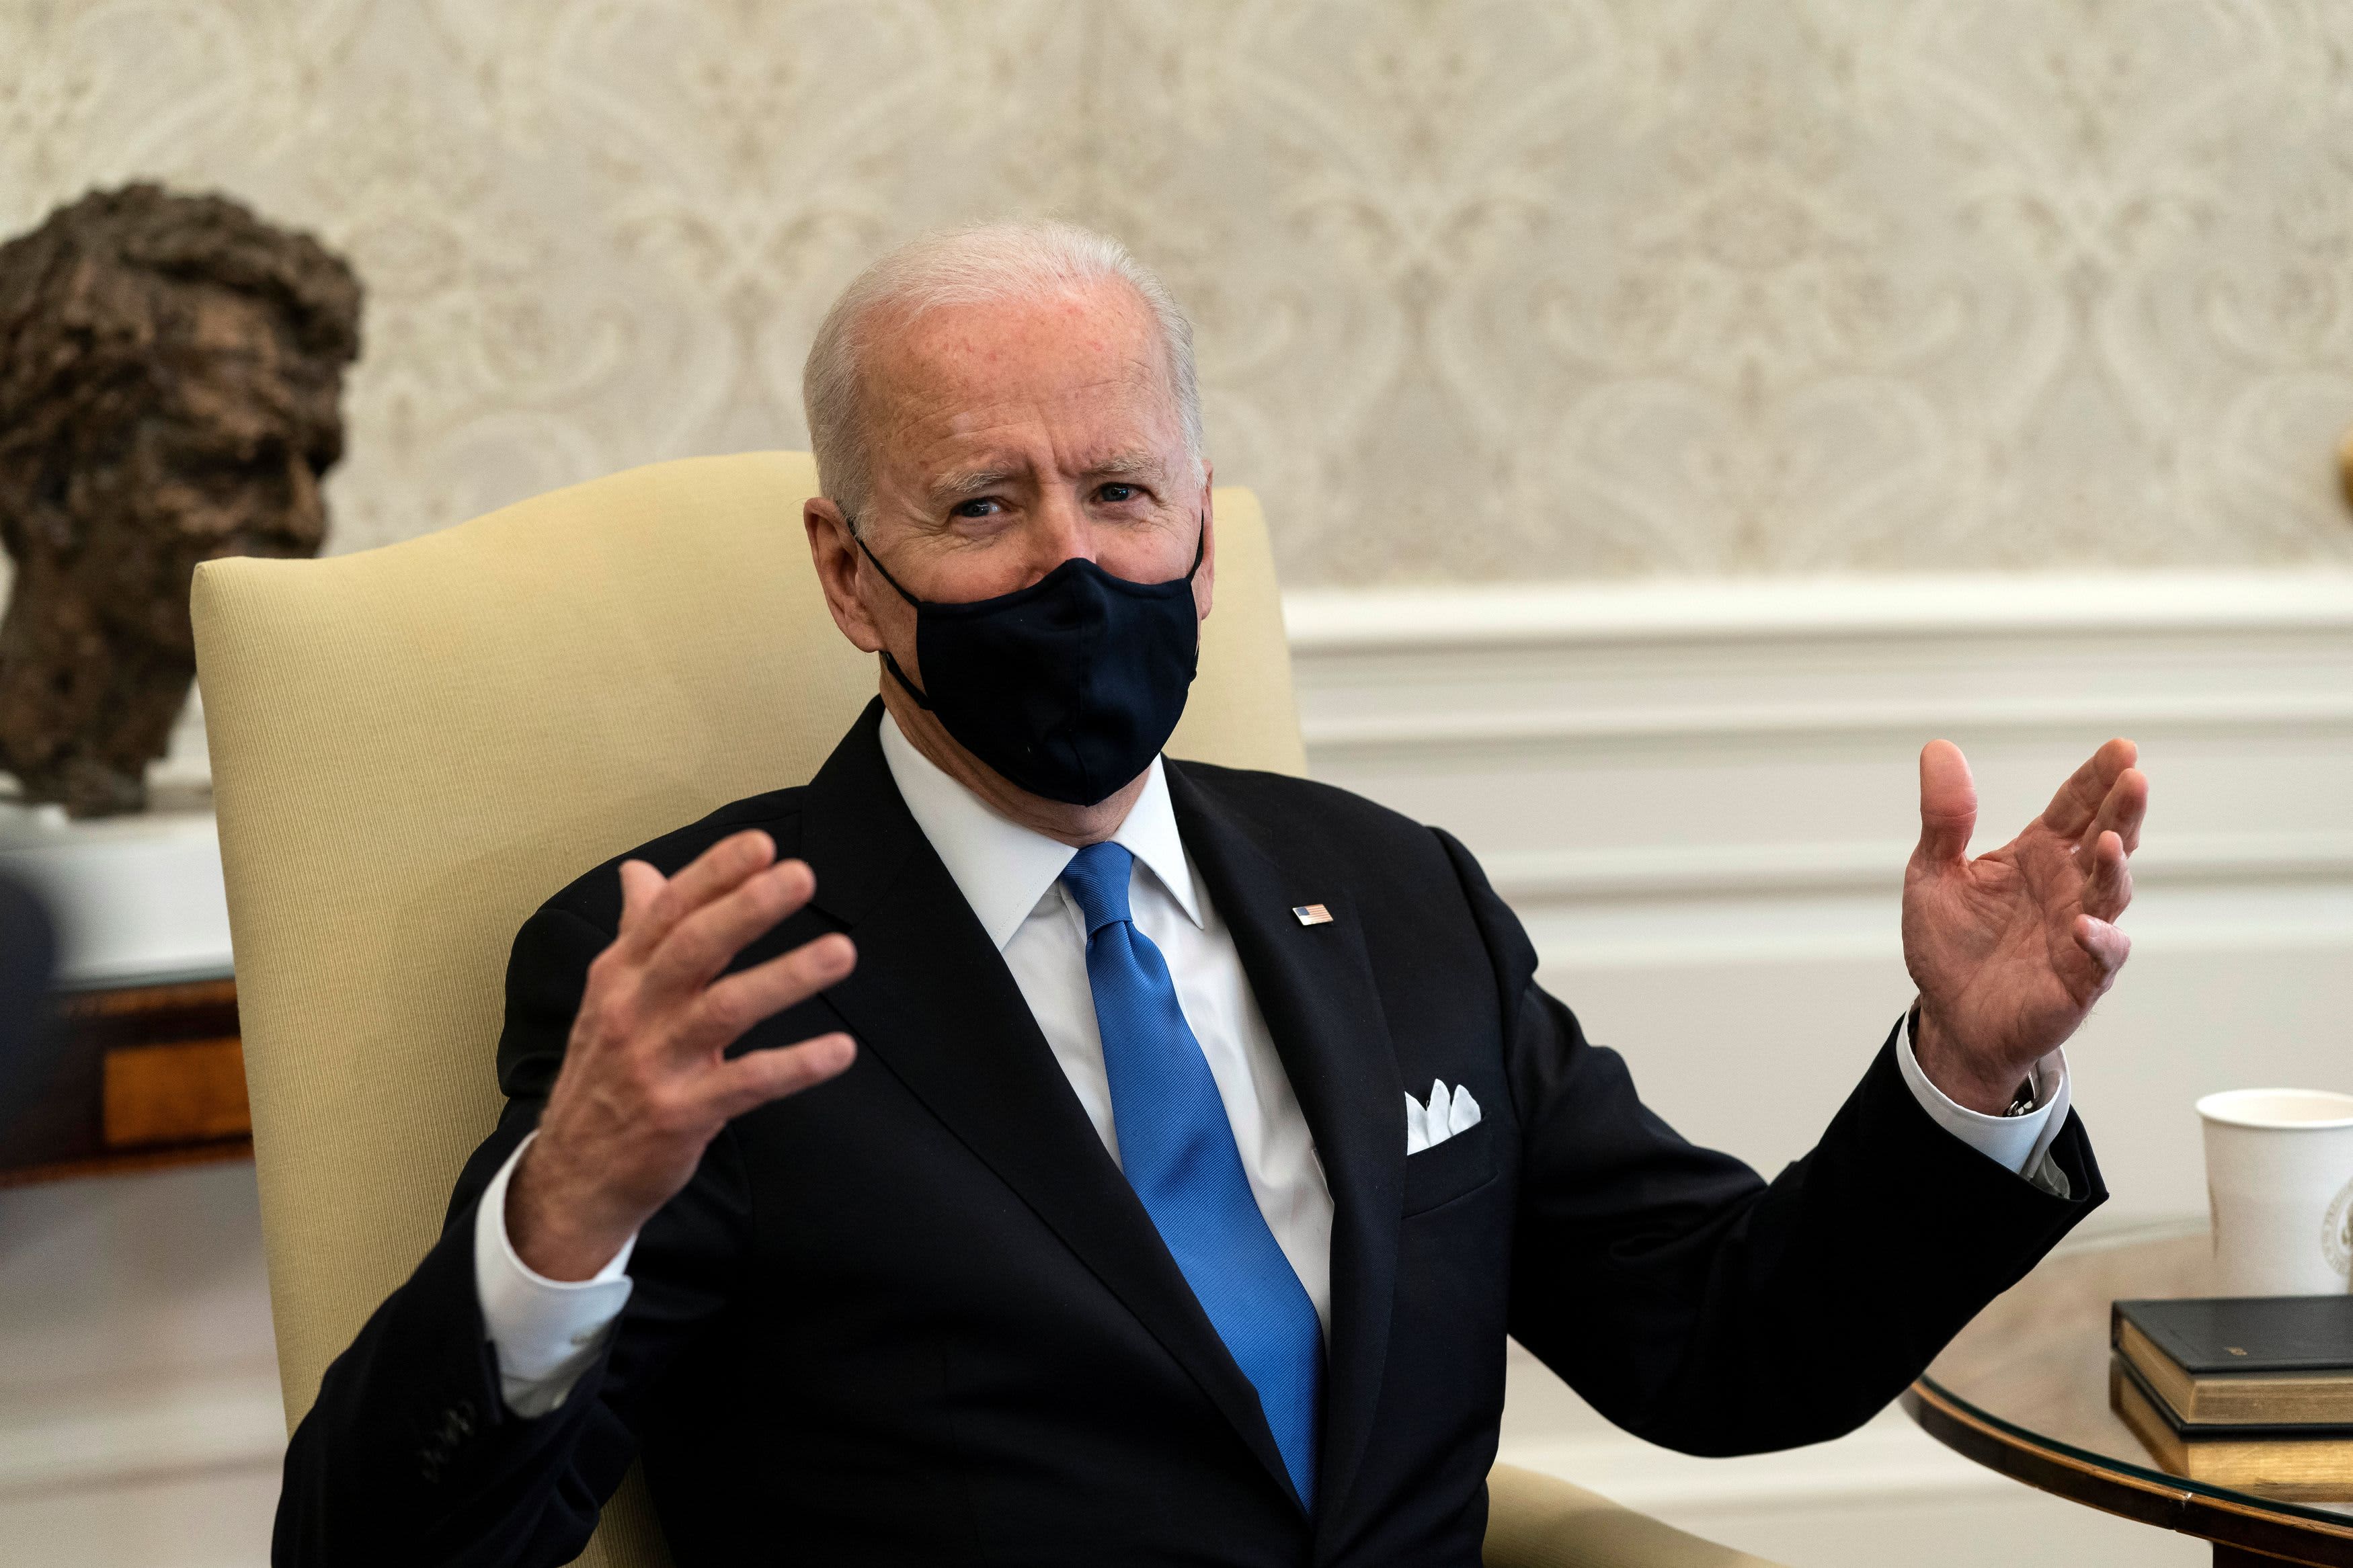 Biden condemns governors for lifting mask mandates, calls it ‘Neanderthal thinking’